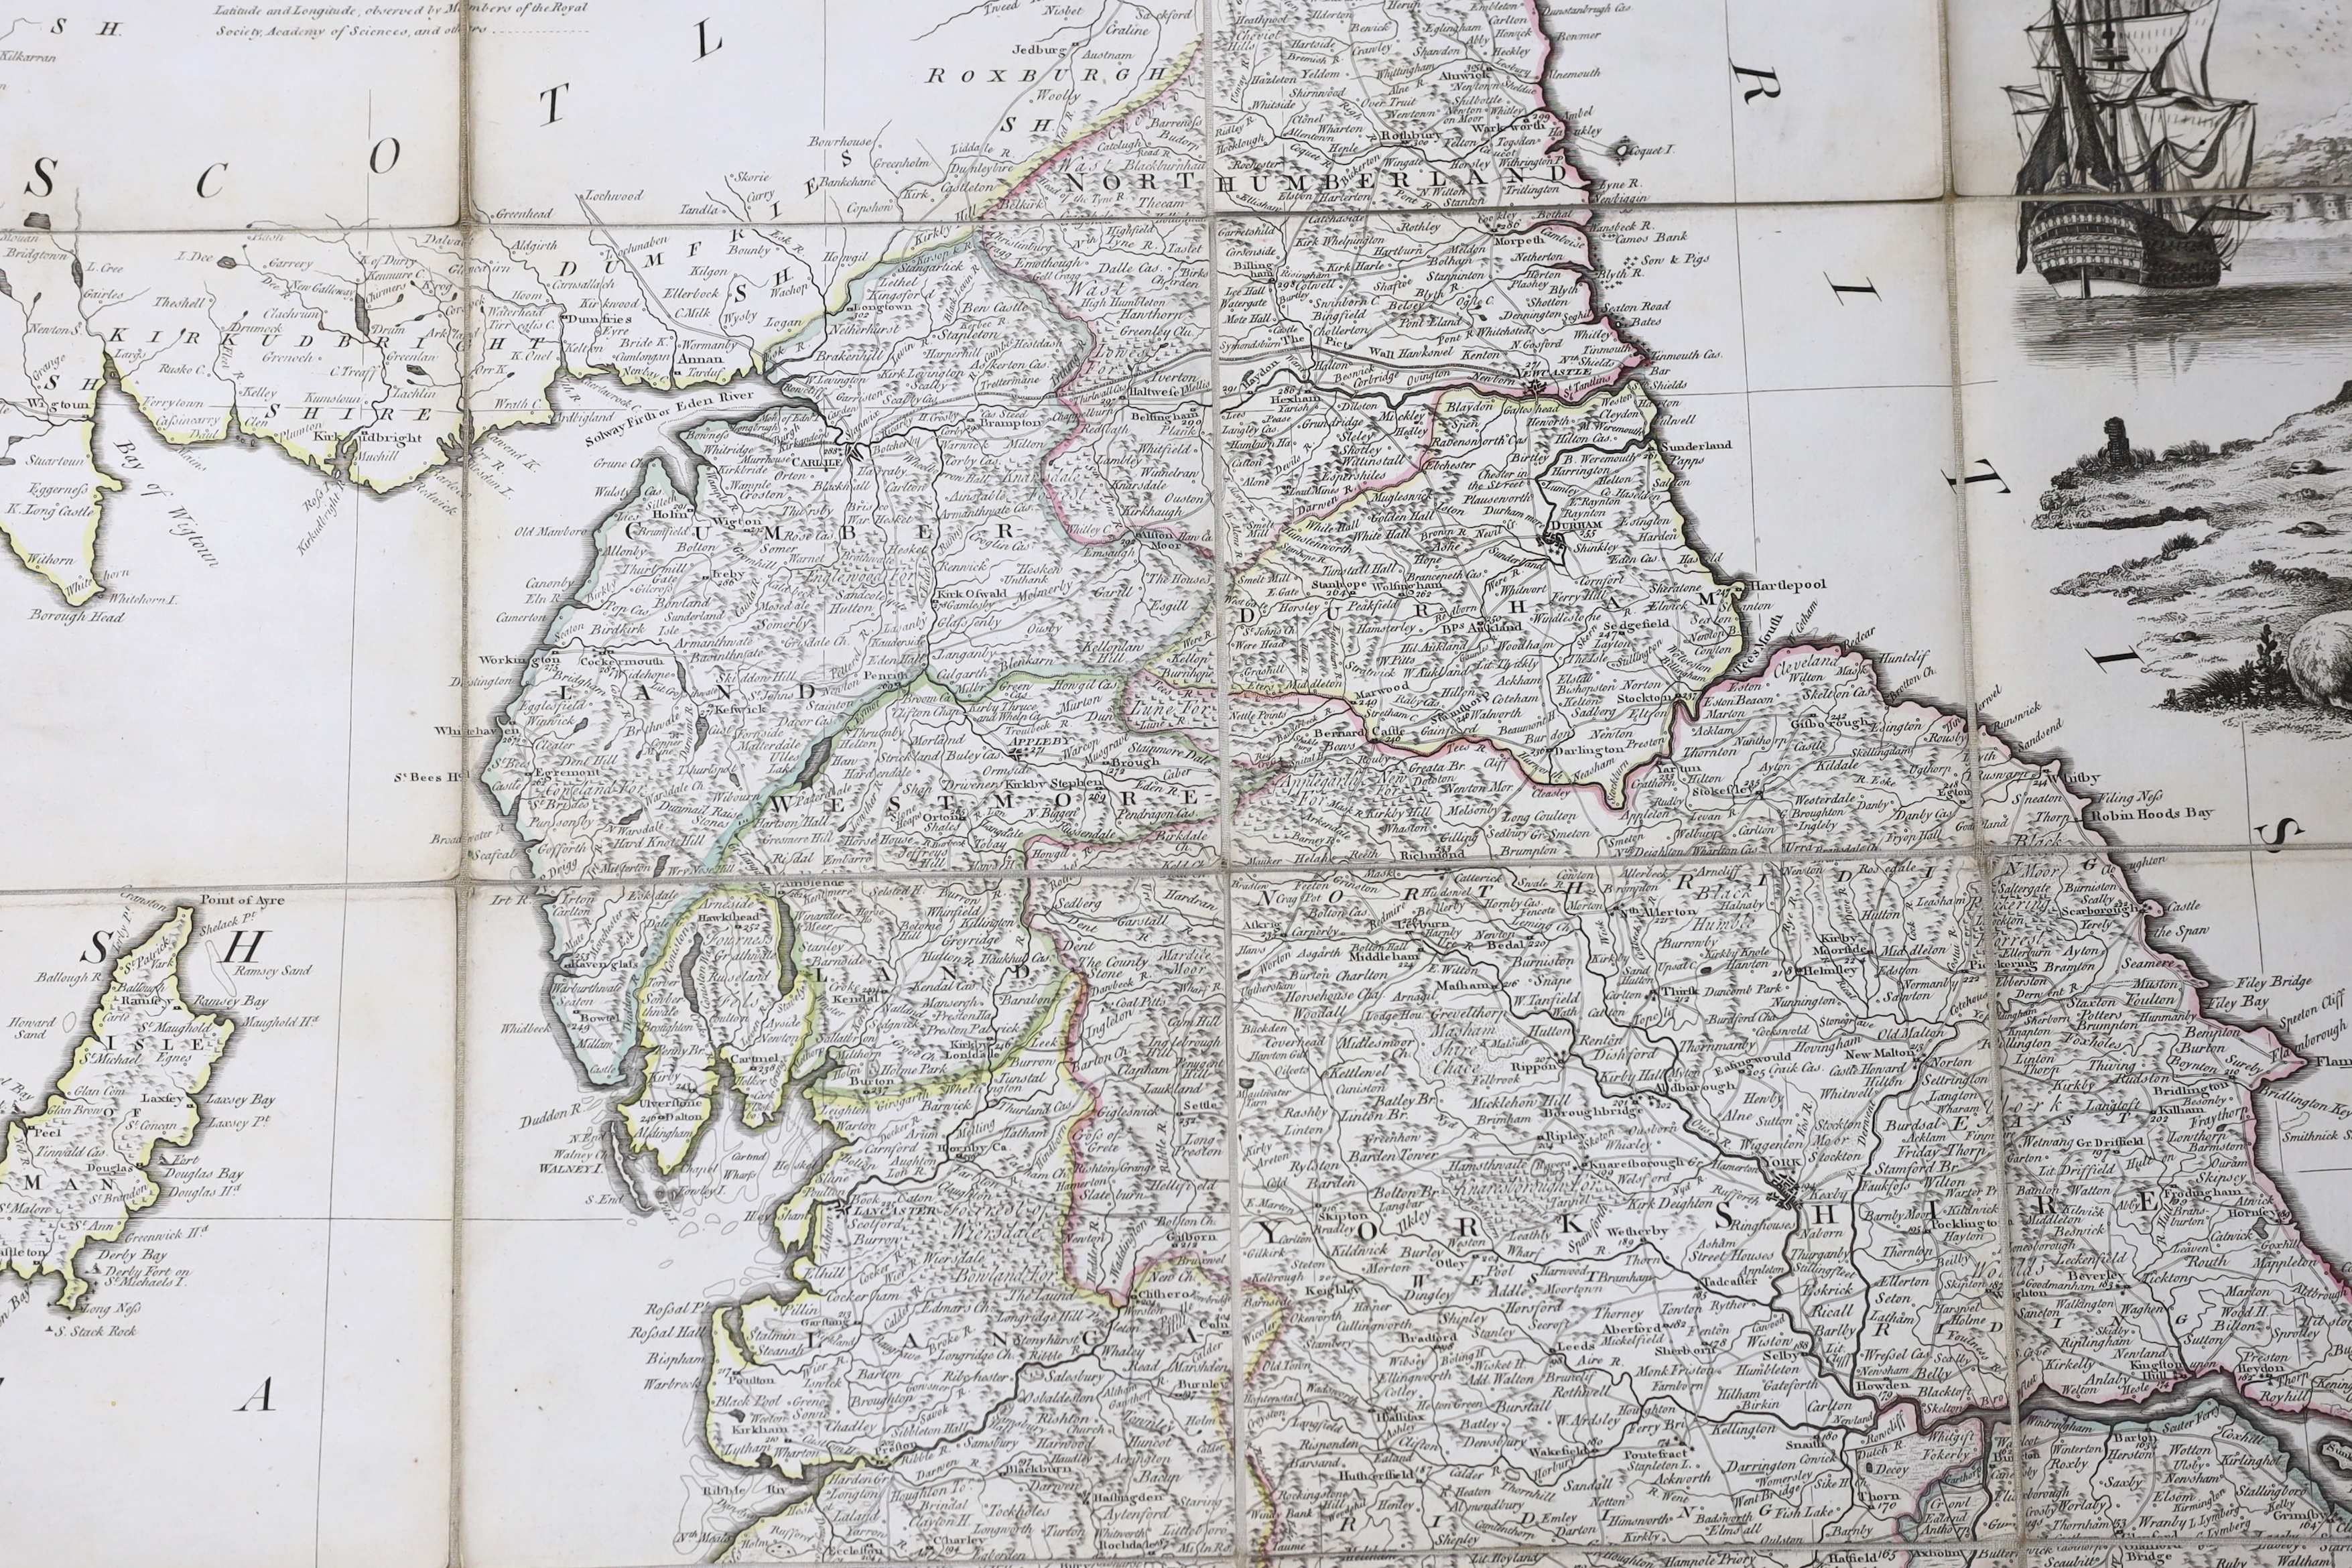 Kitchen, Thomas - South Britain or England and Wales, Drawn from several Surveys & C on the New Projection corrected from Astrometrical Observations…a hand-coloured engraved folding map, linen backed, Robert Sawyer and J